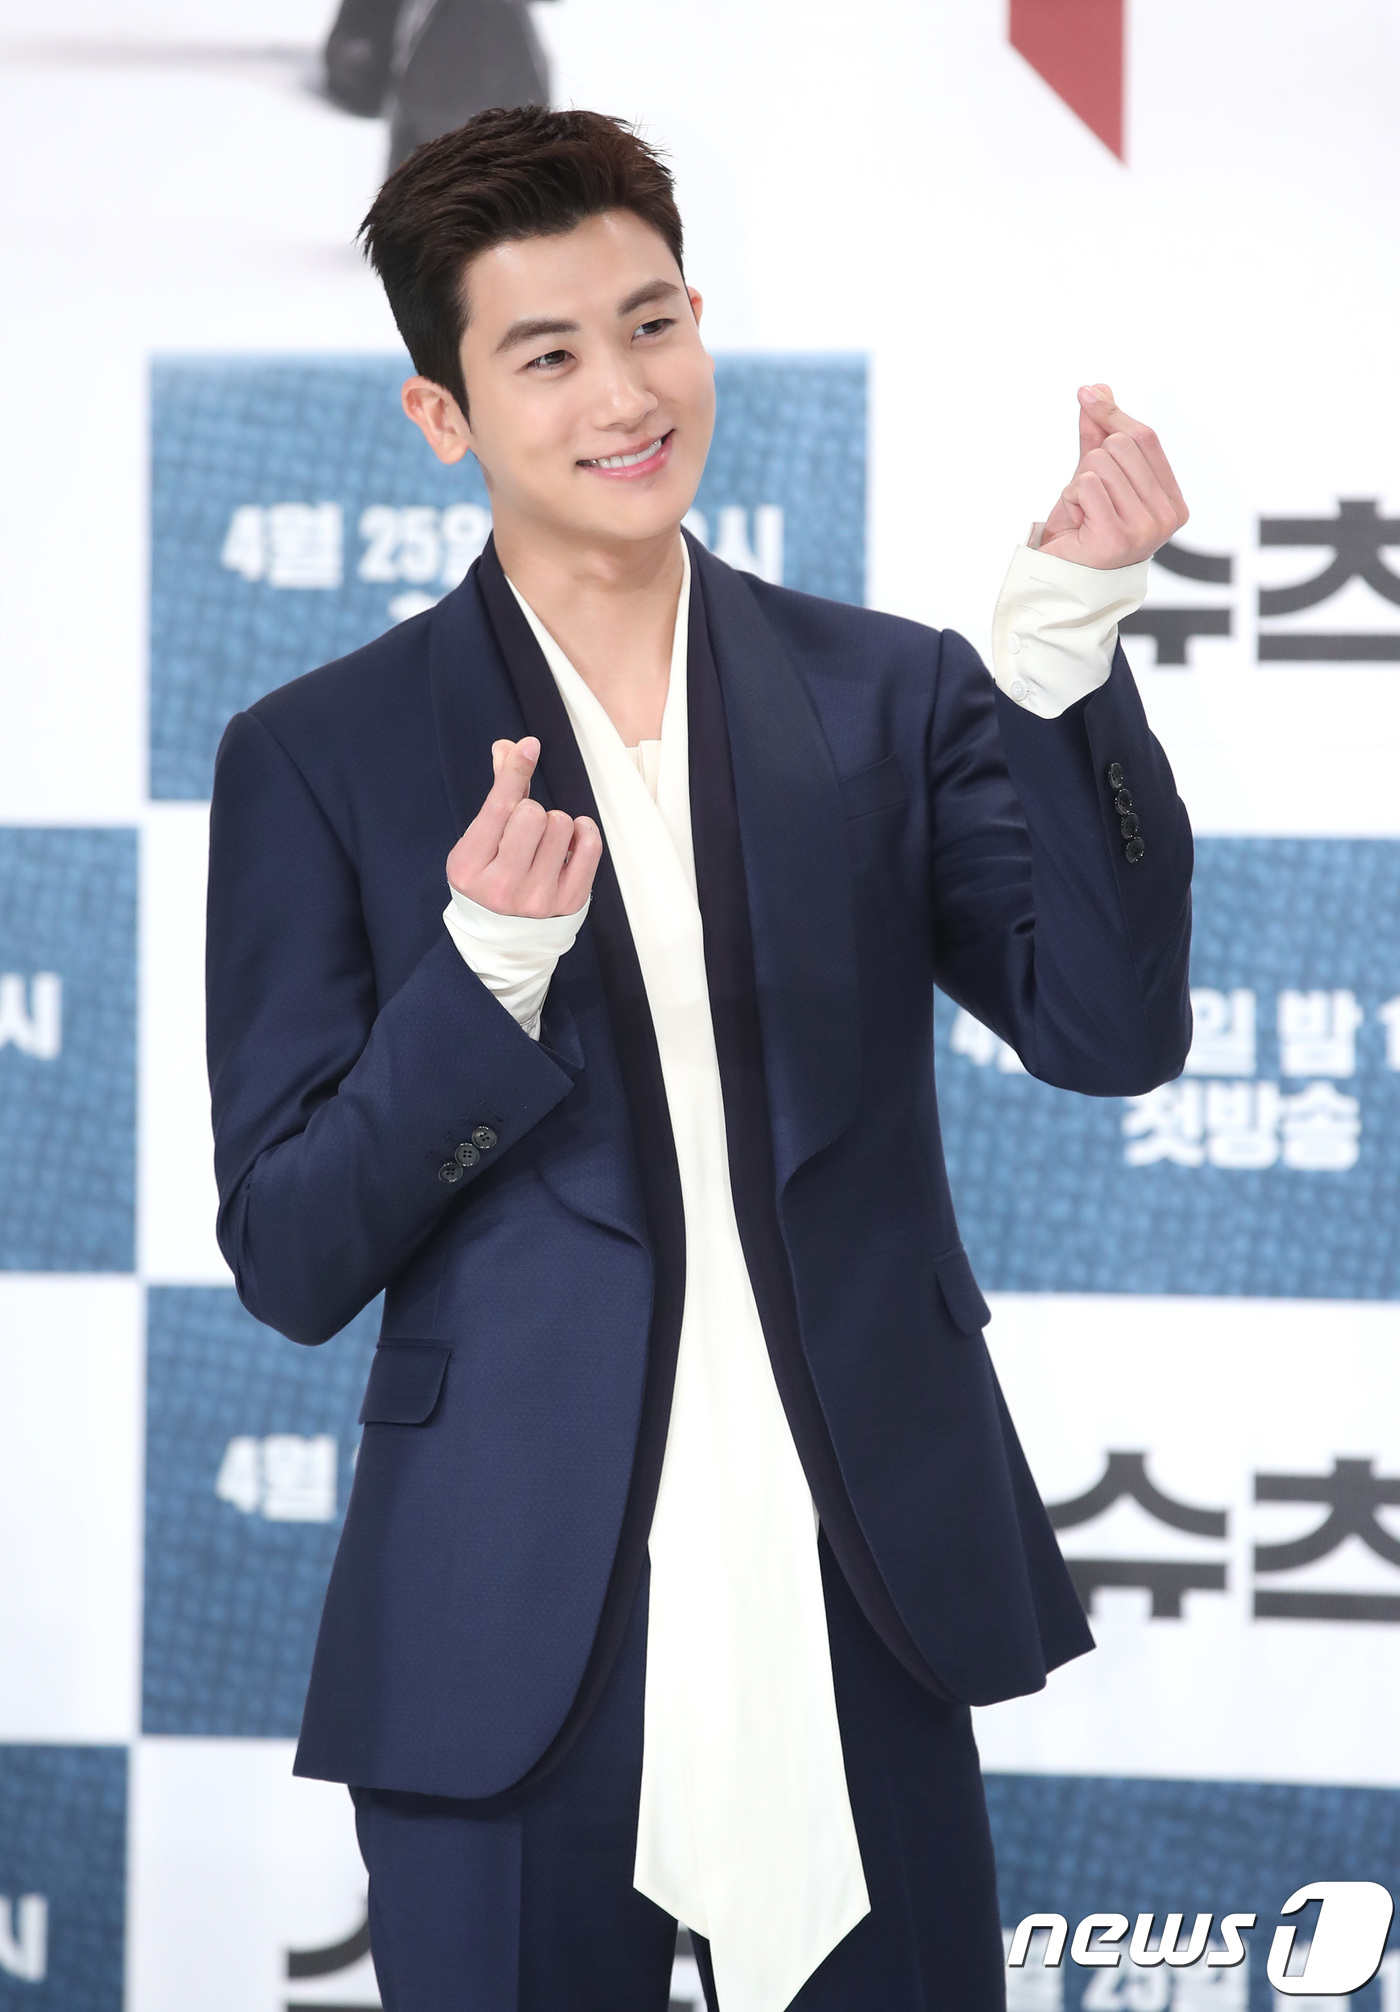 Park Hyung-sik has become a domestic model of Paparesurf after singer Kim Cheong-ha, whose contract expired.Paparesurf chose Pancheong in March as the Greater China model, which is emerging as the next generation rookie of Greater China as the pro-sister of top actress Fan Bingbing.Park Hyung-sik, who played Suits, acted as a paparazzi model on August 8thAccording to industry sources on Monday, Tori Kelly chose Park Hyung-sik as the head of the company to announce Paparessuffy and signed a contract with his agency, the United Artists Agency (UAA).UAA is an entertainment agency with Song Hye-kyo and young children. Paparesurf plans to promote and market Park Hyung-sik from 8th.Kim Han-gyun, 34, CEO of Tori Kelly, posted a photo of Park Hyung-sik and Paparesurfs representative products, Springbee Mask Pack and Gift Clearing Line, on SNS.Kim laughed, saying, I do not need words, I have been squid next to me.Park Hyung-sik made his debut as an idol group Children of the Empire in 2010; he made his name in 2013 when he appeared on MBCs entertainment program Night - The Real Man.At the time, Park Hyung-sik secured a lot of fans with the nickname baby soldier with clean skin and stupid appearance.Through this, he appeared as the protagonists childhood in Nine: Nine Hours and Drama Special, hinting at the possibility of Smoke Stone.In the SBS drama Upper Society, which became the first starring film, he became an actor in the role of Yoo Chang-soo.Park Hyung-sik expanded his awareness last year by playing the role of Ahn Min-hyuk, CEO of a game company, who hired Dobong-soon (Park Bo-young) as a bodyguard in the JTBC gilt drama Dobong-soon, a powerful woman.Especially, KBS 2TV drama Suits, which recently ended, showed a further growth in acting as a fake new lawyer Ko Yeon-woo with genius memory and empathy ability.Park Hyung-sik played the lead role of Suits, who had a top audience rating of 10.7%, capturing the hearts of his sisters through his younger and trustworthy image.It is said that it showed the charm of the pale color that encompasses the charisma of man from the young and fresh energy.Park Hyung-sik is an advertising model of Woori Bank based on favorable image.Recently, it was selected as the exclusive model of Love of Destiny: Palace, a 3D palace social mobile game produced by Wish Interactive.China wings wide Paparesurf Bombie Honey Mask PackPaparesurf is a leading brand of the rapidly growing course Tori Kelly, which has become a global brand with the popularity of the Spring Bee Mask Pack line in China.The Spring Bimask Pack Line is being sold at local online malls such as Watsons, VIP, Shaoh Hongshu Mall and T Galleria, which are beauty editing shops throughout China.The Bombie Honey Complex Mask Pack is a mask pack line that contains propolis extract and honey extract found in honeycomb to fill moisture and nutrition with dry skin.Tori Kelly explained that it uses nude seal sheet to increase adhesion and deliver the essences moisturizing and nutritious feeling to the skin.Papare Surf is also increasing its consumer contacts by entering the health & beauty shop Olive Young, Loops and Shinsegaes Beauty editorial shop Sicor in Korea.According to the Financial Supervisory Services electronic disclosure system, last years sales and operating profit of Tori Kelly (Paparesurf, Inga and Mustus) increased by 47.1% and 110%, respectively, to 213.6 billion won and 93 billion won, respectively.An industry official said, Pancheong, which has emerged as a popular member of the idol trainee who is the production of China version 101, is expected to play a domestic model in Greater China and Park Hyung-sik will be active as a domestic model. Park Hyung-sik is called baby soldierA one-year contract for domestic exclusive model, Greater China model Pancheong, Tutop Kim Han-gyun, Park Hyung-sik and certification shot Squid next to laugh